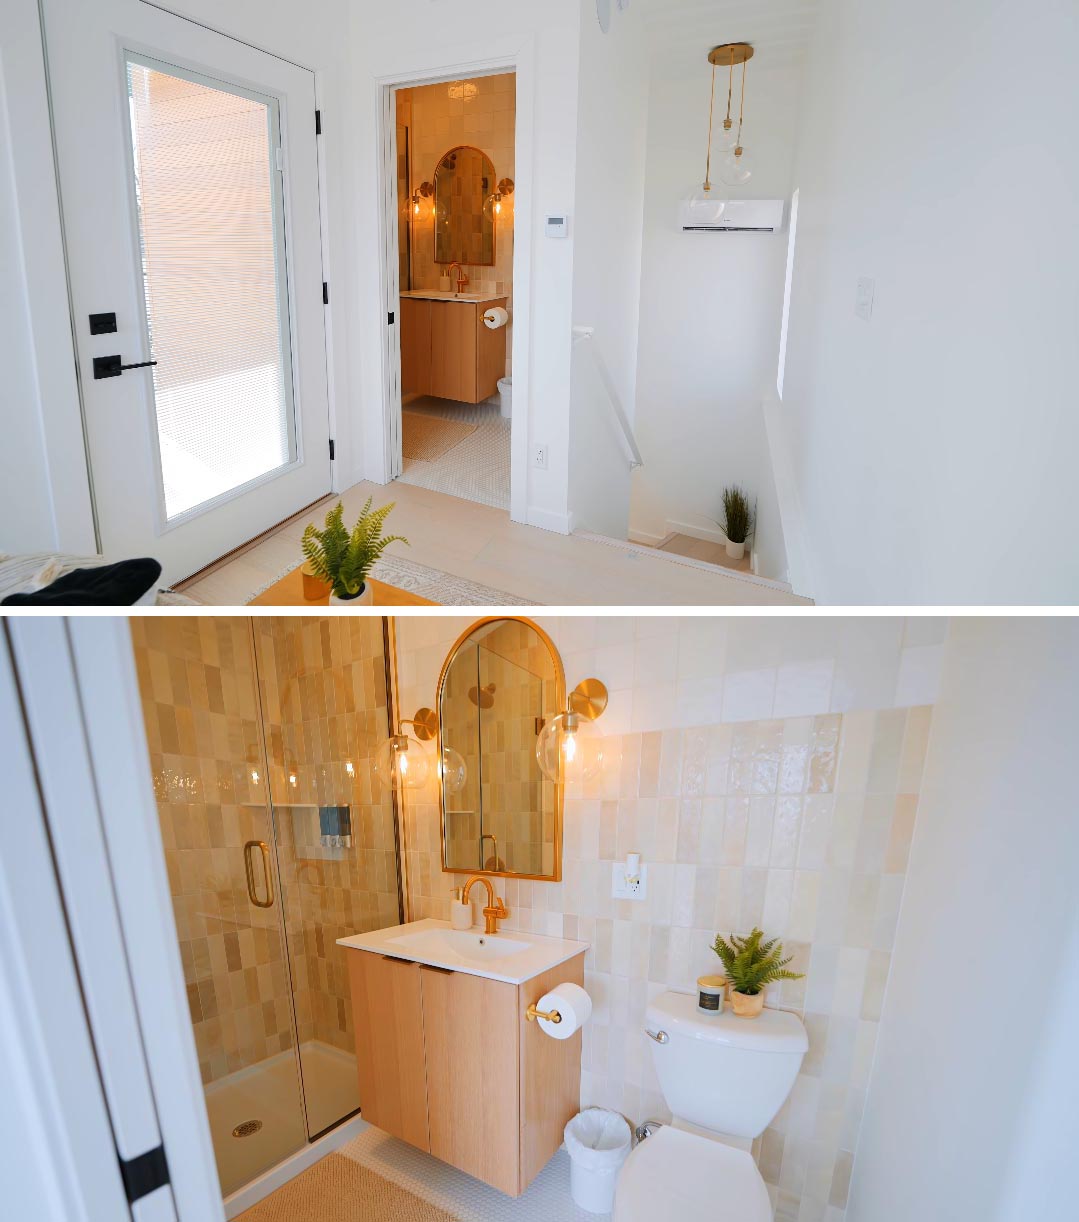 The design of this tiny house bathroom echoes the kitchen, with gold accents, white countertop, wood vanity, and light colored tiles.